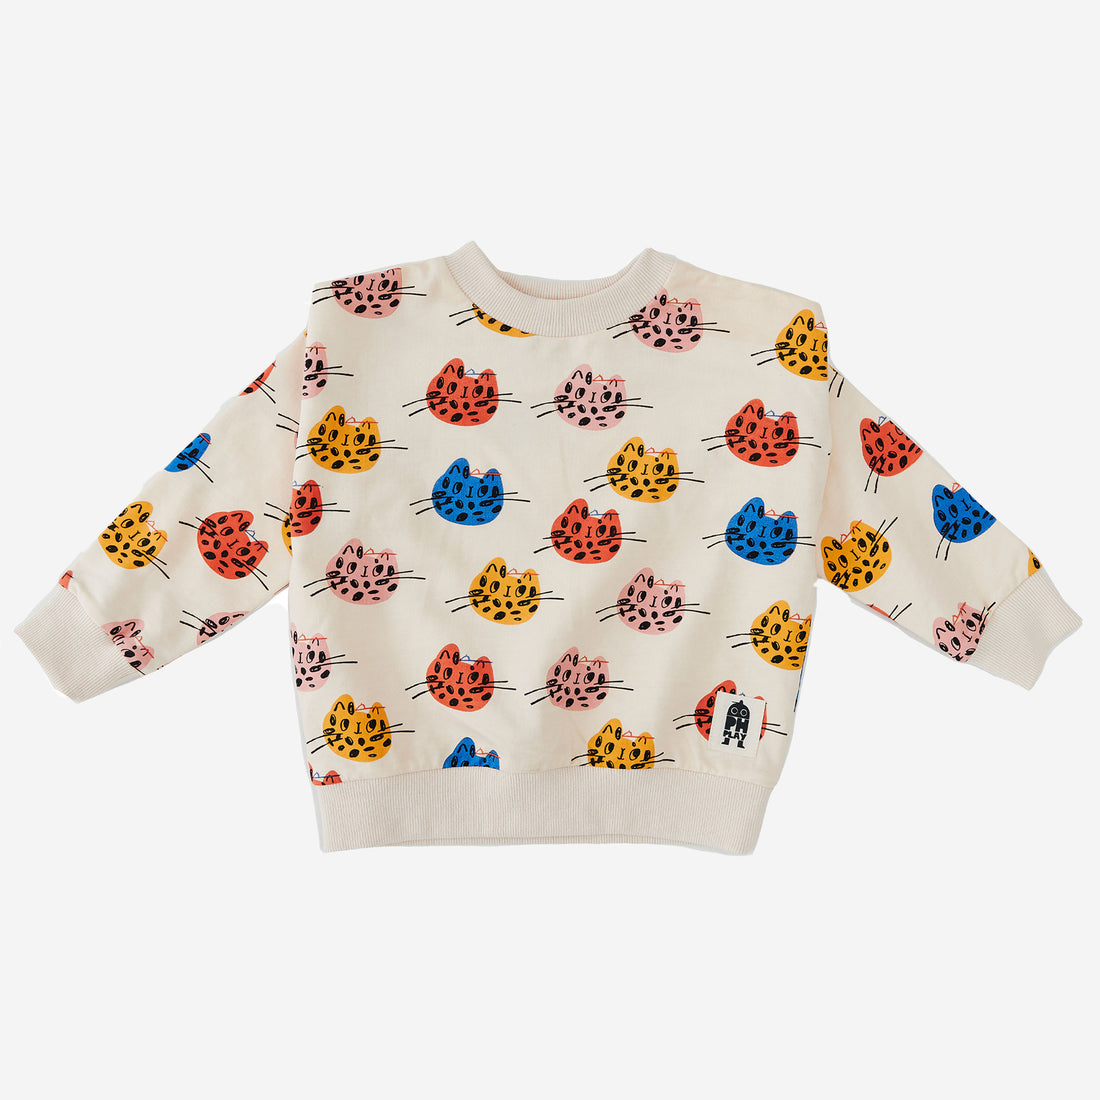 Multi Cat sweatshirt with cream background and multi colors cats. The sweatshirt has rib round neck and cuffs